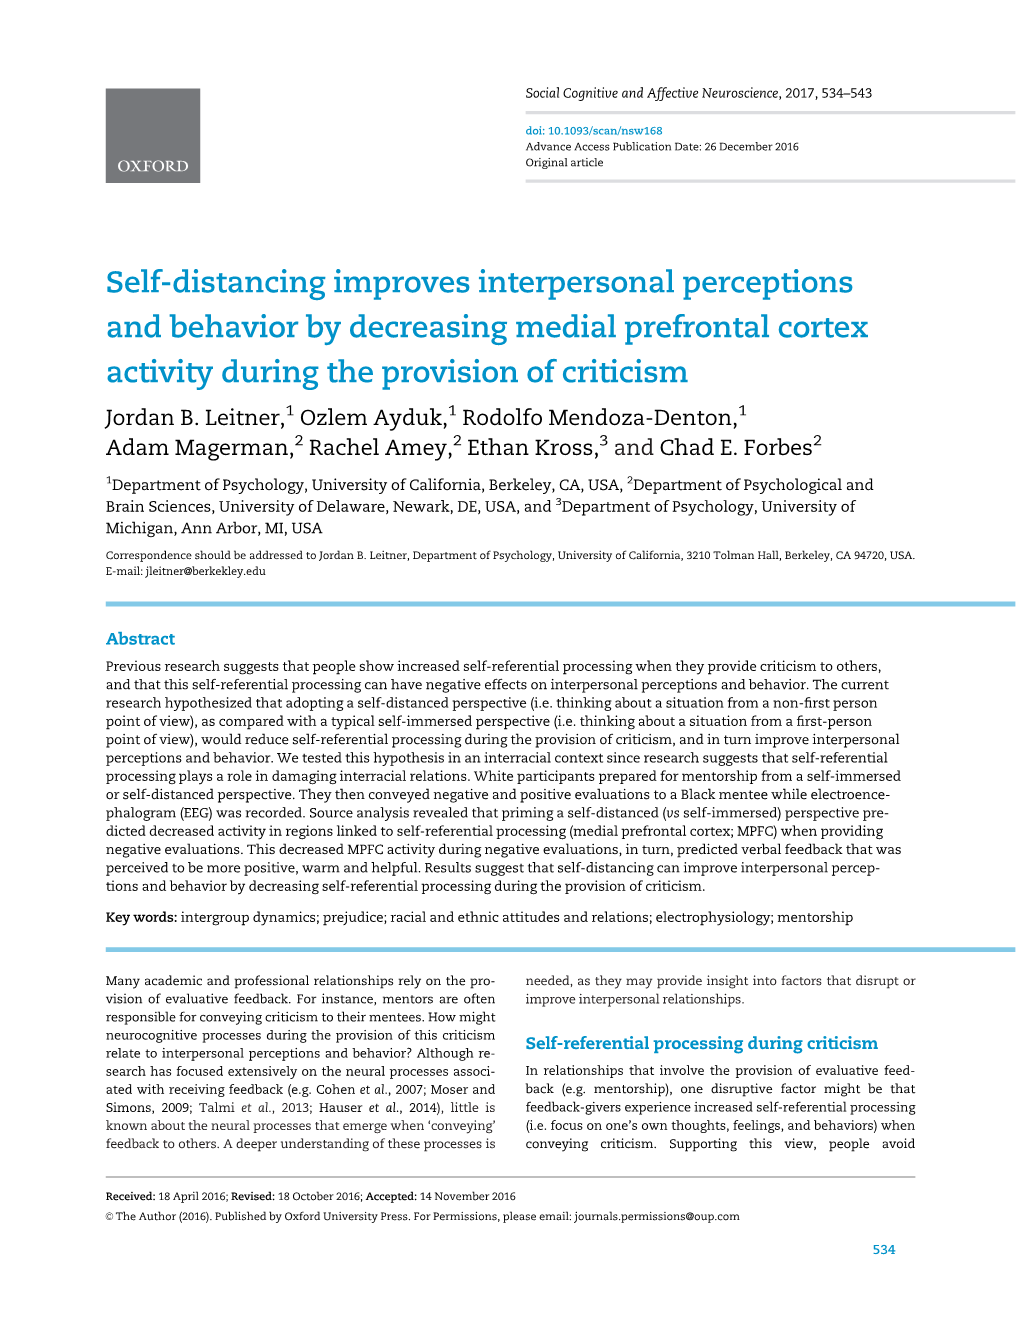 Self-Distancing Improves Interpersonal Perceptions and Behavior by Decreasing Medial Prefrontal Cortex Activity During the Provision of Criticism Jordan B